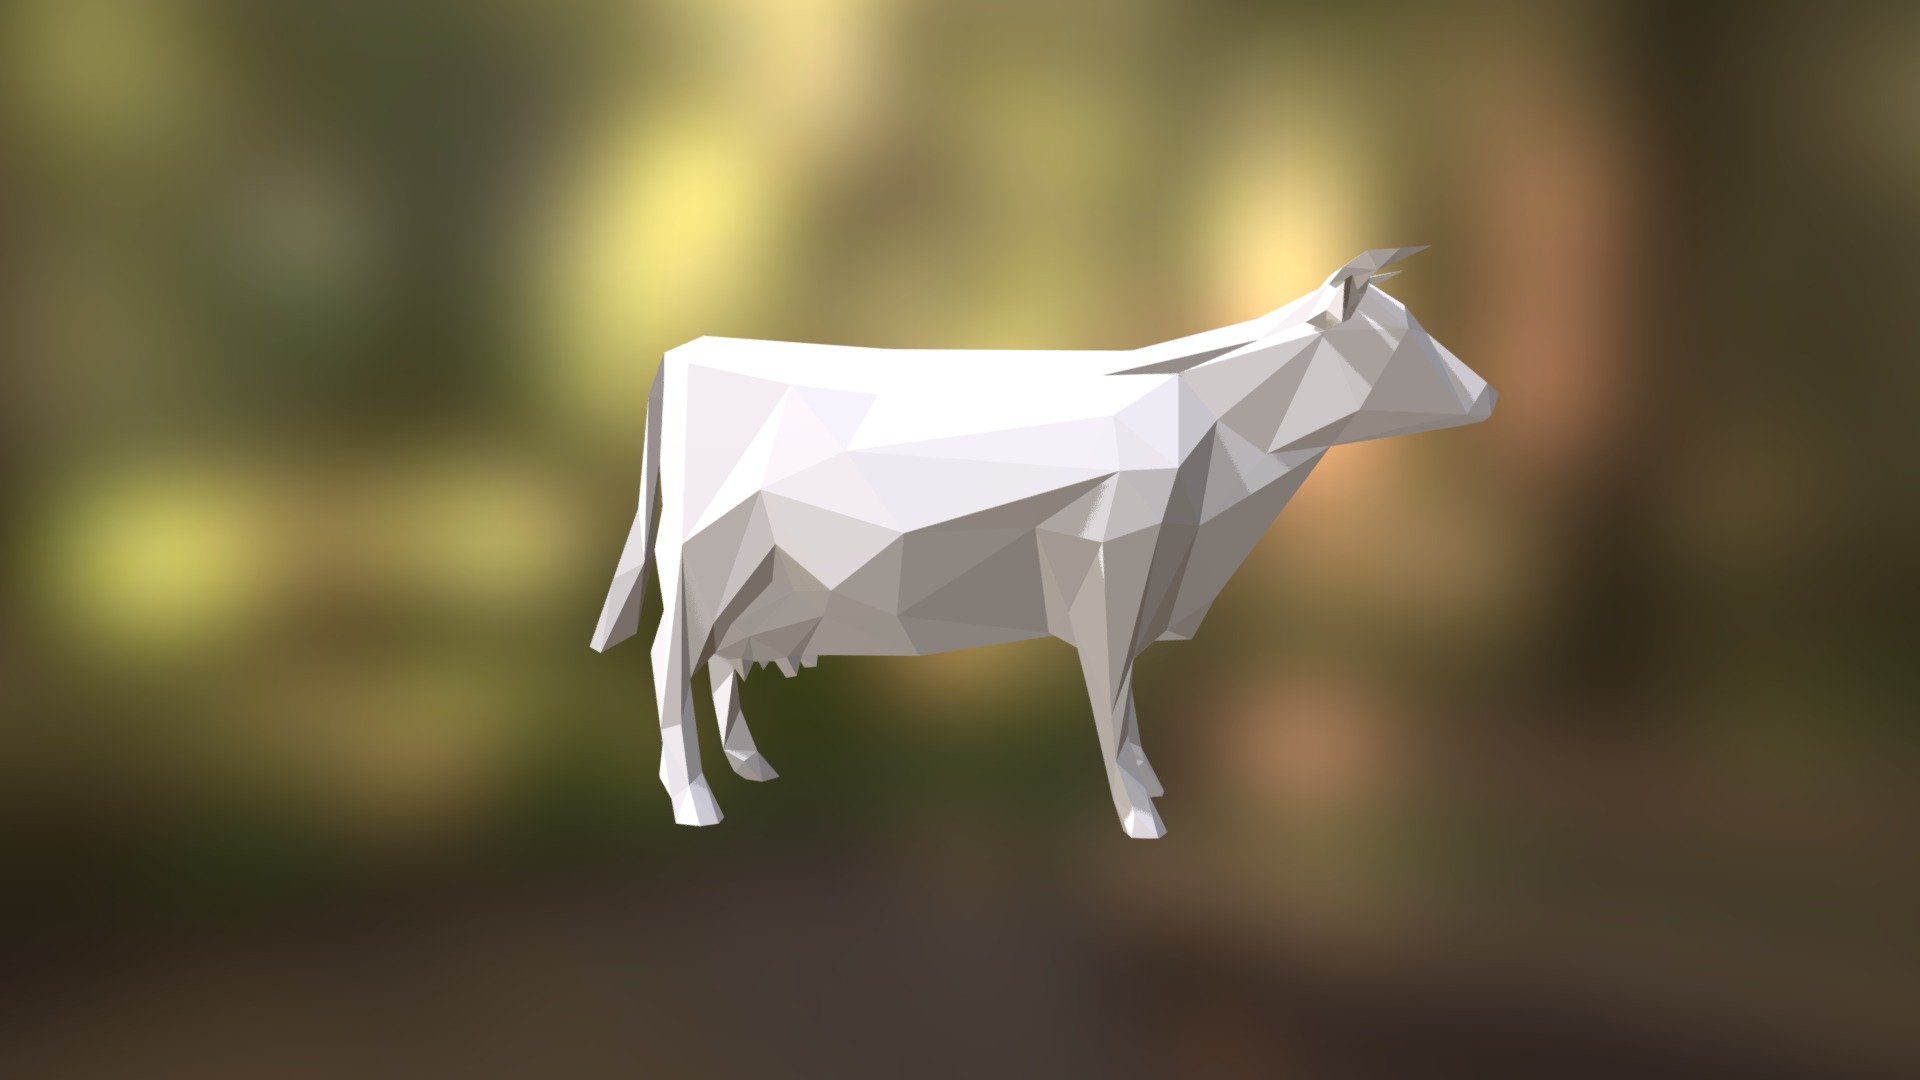 Low Poly 3D model for 3D printing. Cow Low Poly sculpture.  You can find this model for 3D printing in my shop:  -link removed-  Reference model: http://www.cadnav.com - Cow low poly model for 3D printing 3d model